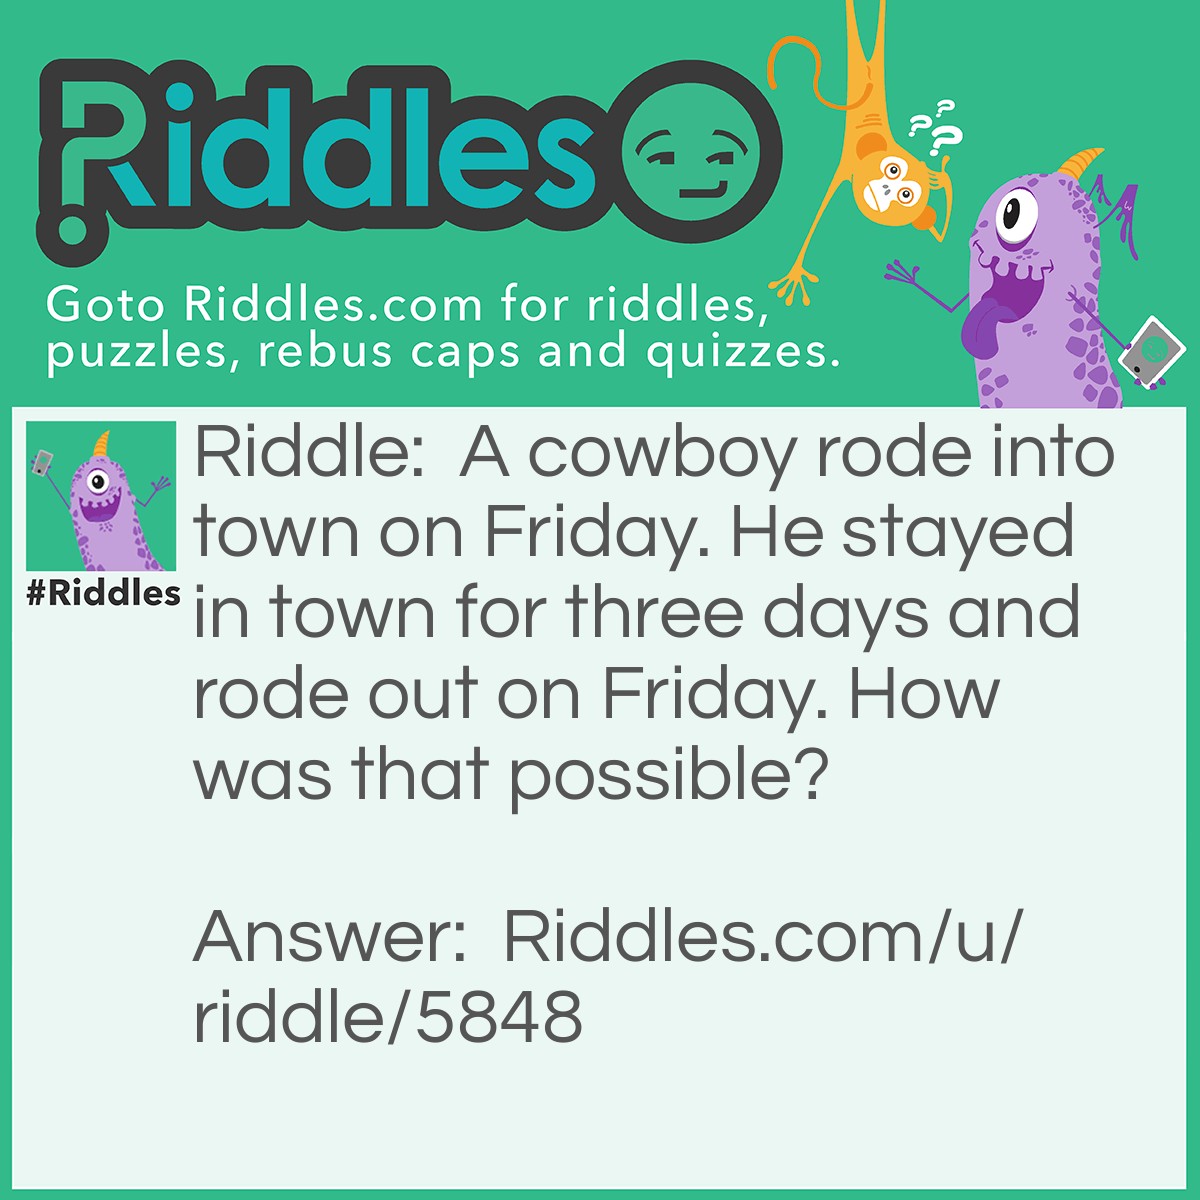 Riddle: A cowboy rode into town on Friday. He stayed in town for three days and rode out on Friday. How was that possible? Answer: Friday was the name of his horse.